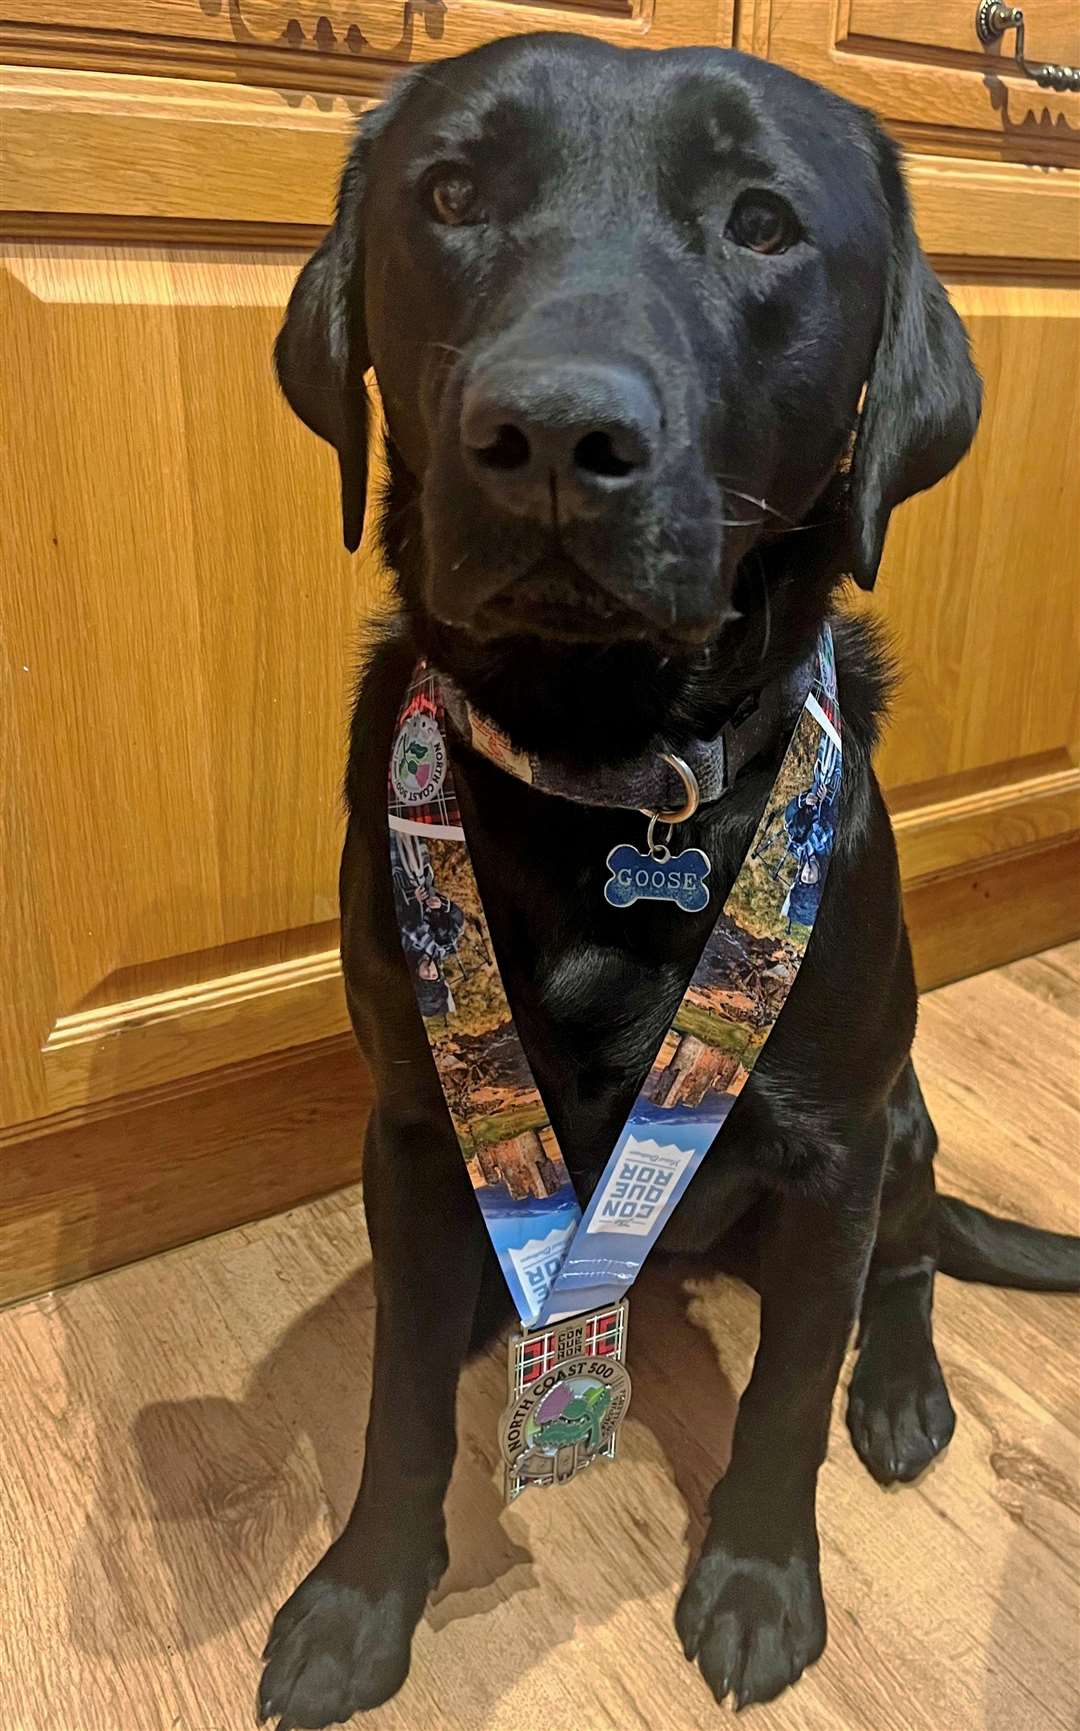 Goose wearing the medal Sarah received for completing her North Coast 500 Virtual Challenge.